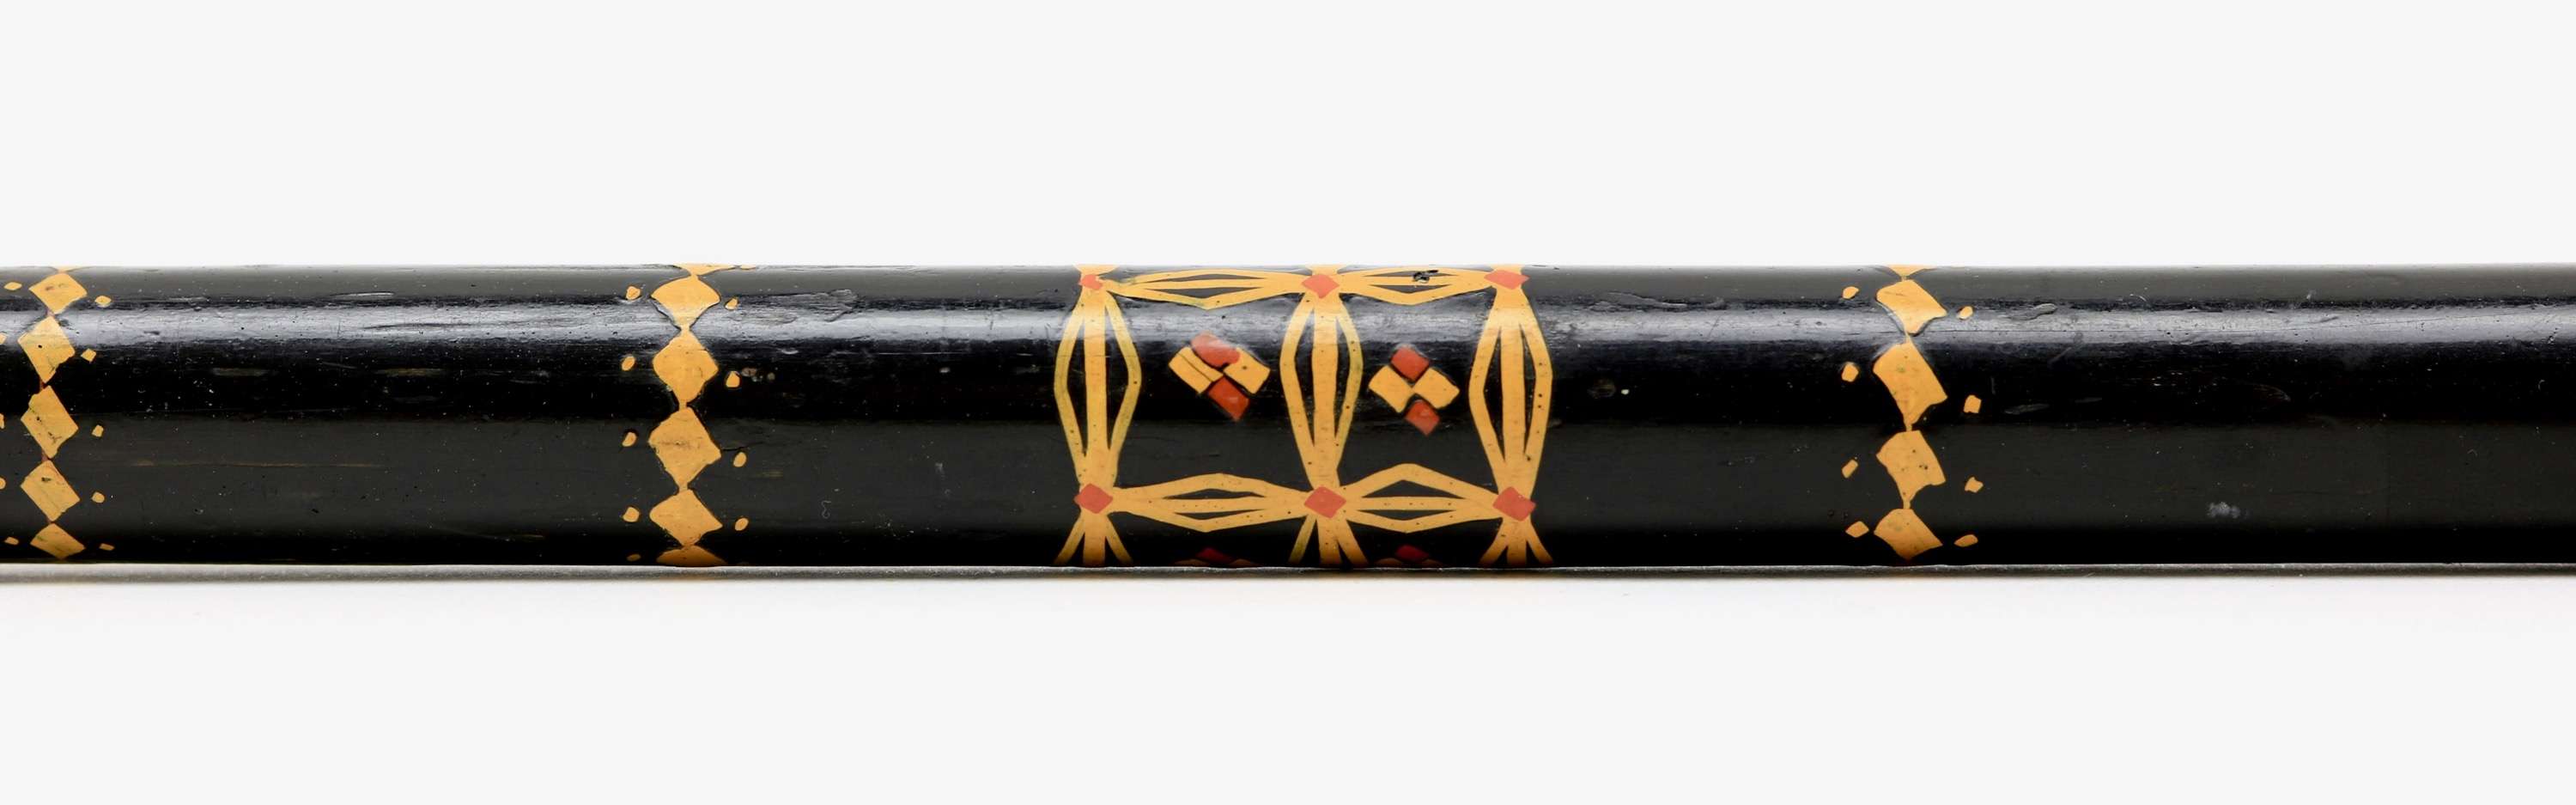 Sinhalese lacquered cane